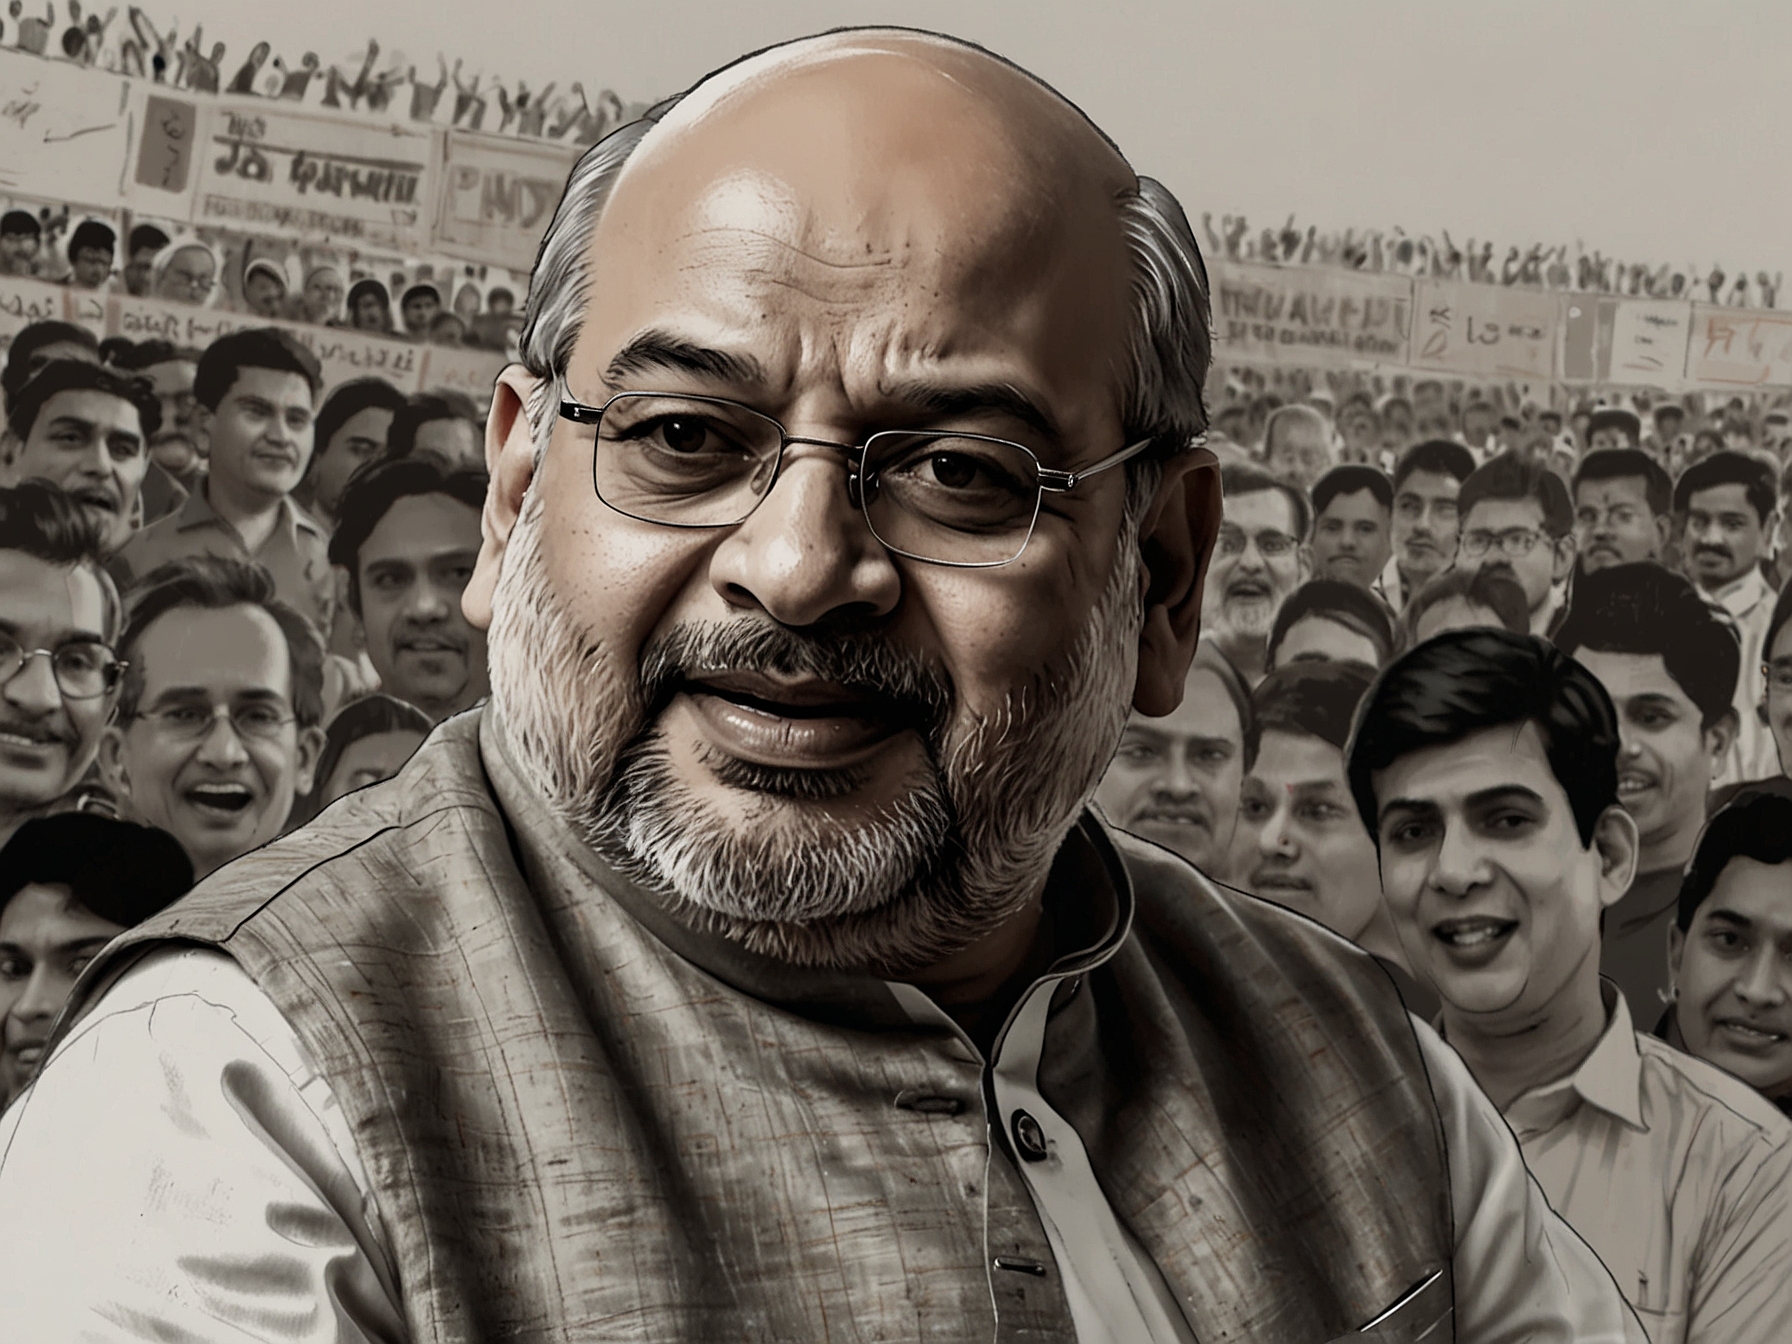 Amit Shah passionately addresses the crowd at a political rally, highlighting his points about Rahul Gandhi's controversial remarks and historical events like the Emergency.